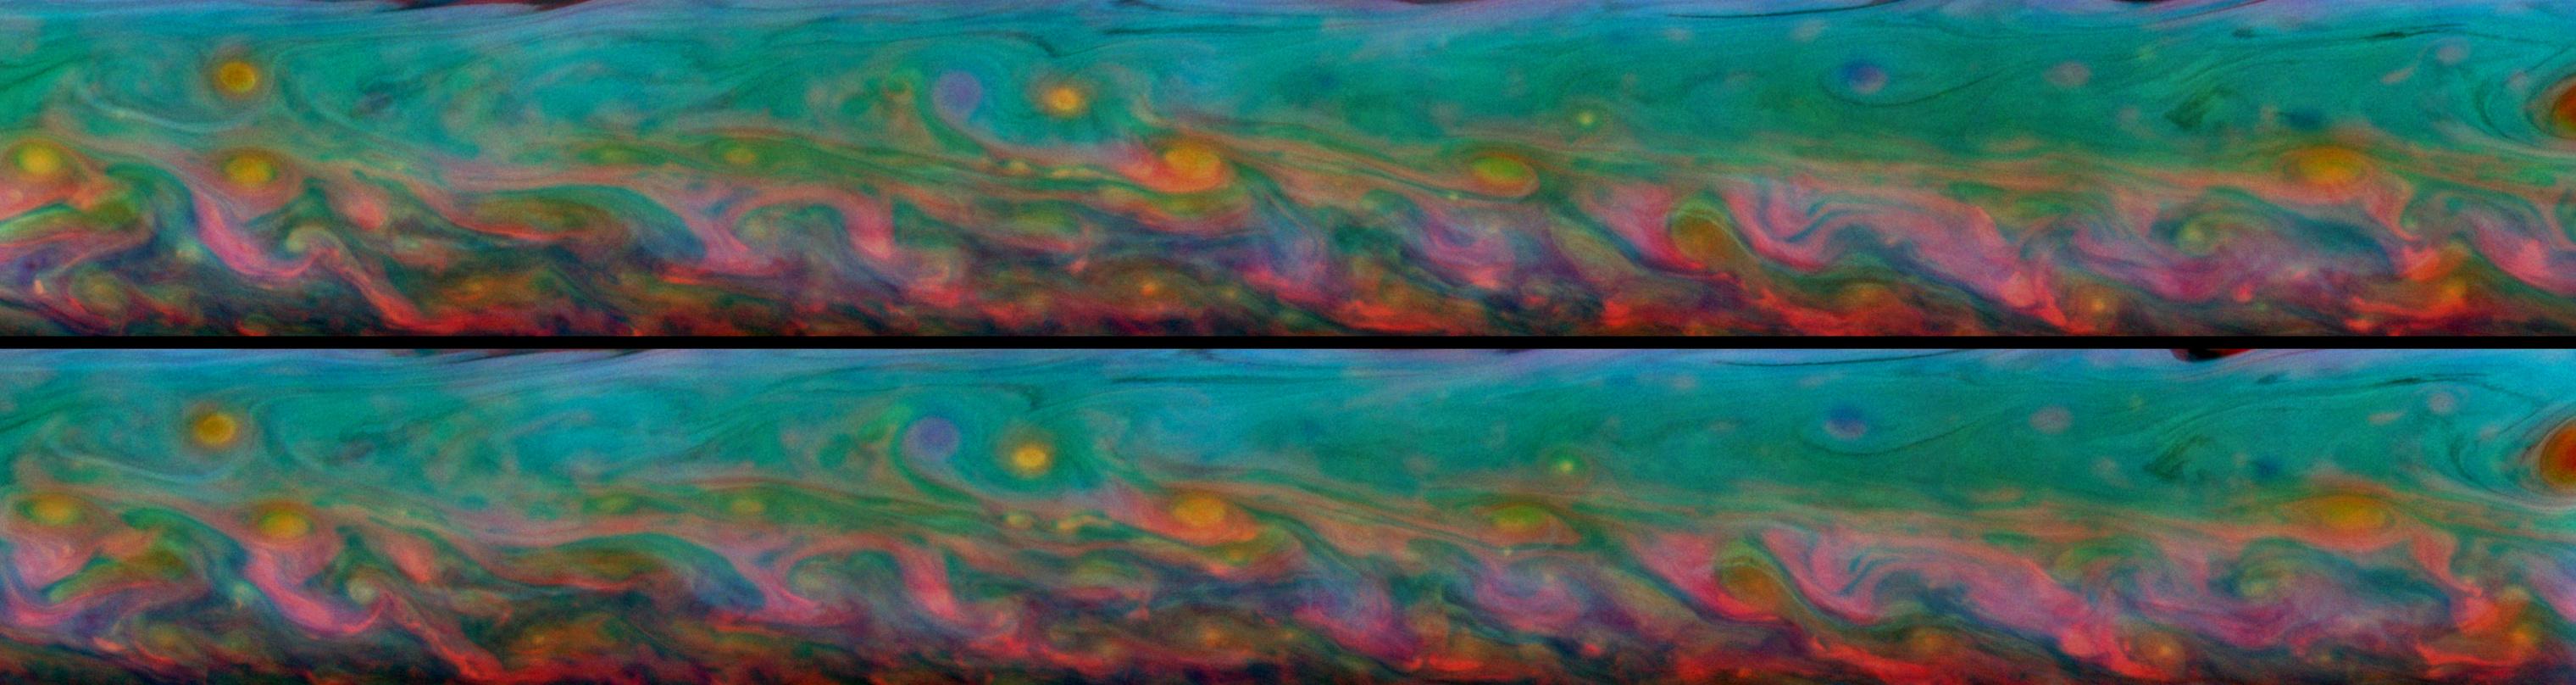 Patterns that come and go in the course of one Saturn day within the huge storm in the planet's northern hemisphere.